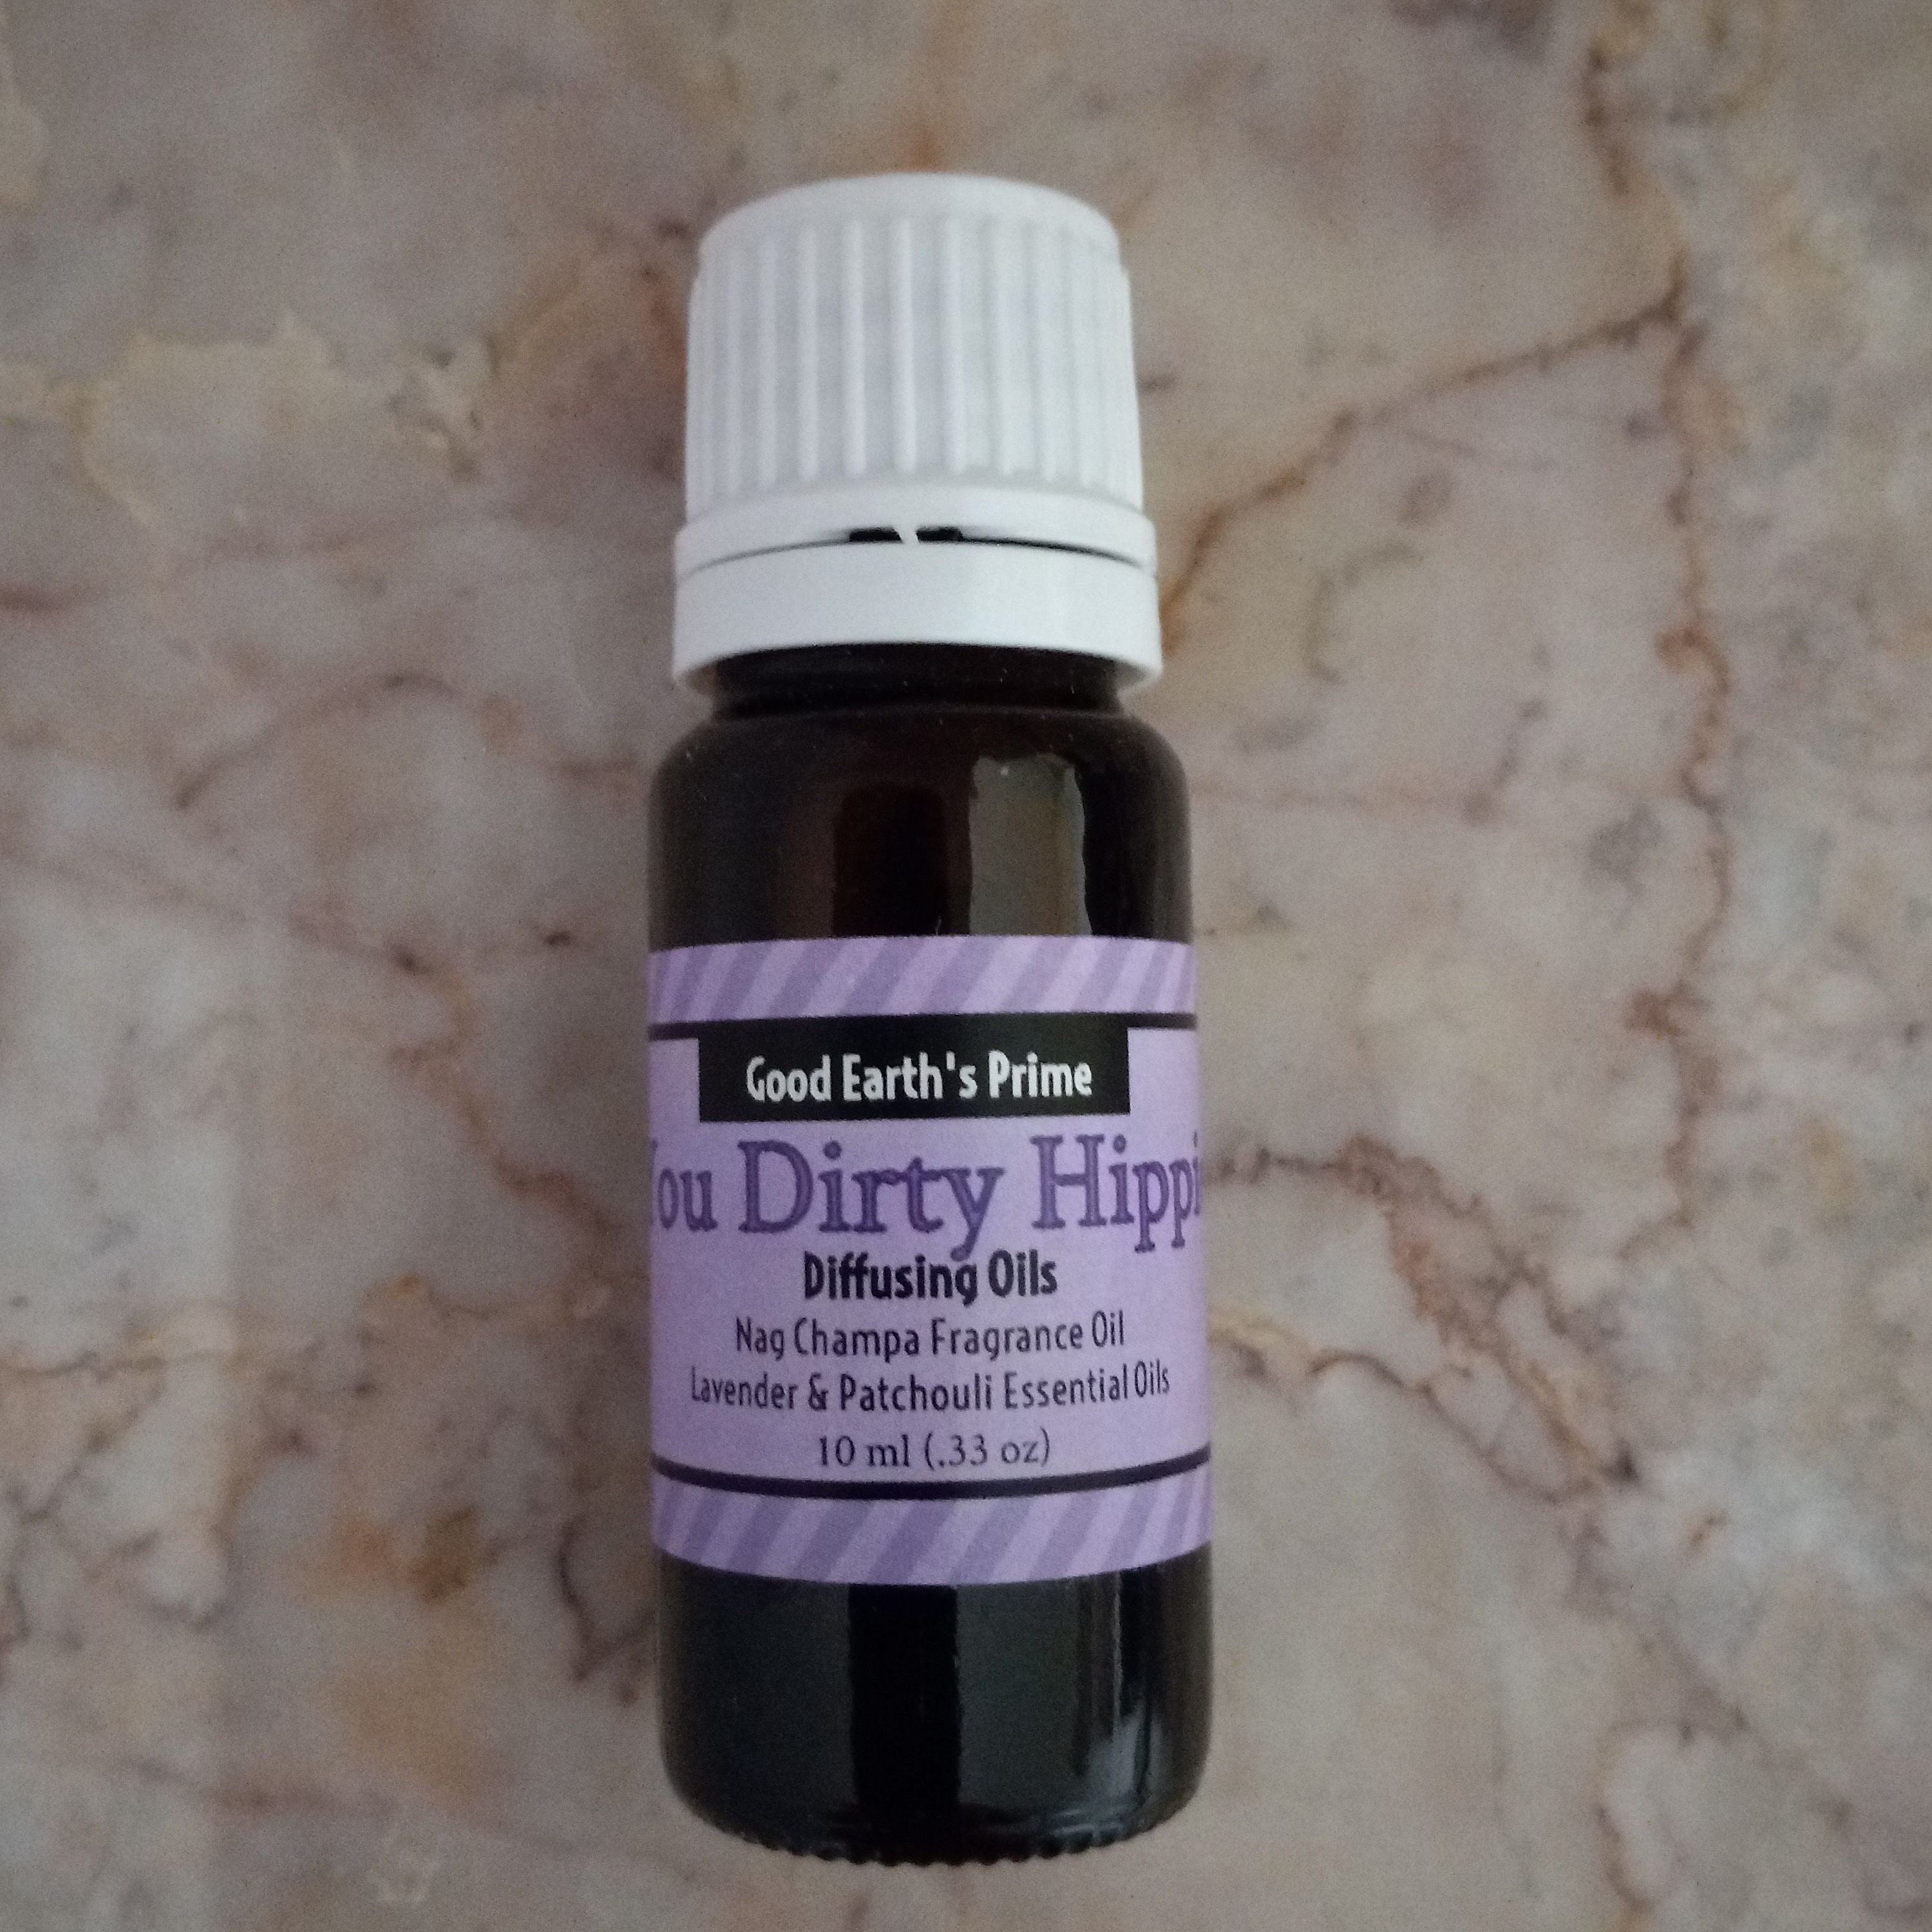 You Dirty Hippie Oil Blend Great For Diffusing Or As A Perfume, Pure Oils, Unique Deep Vintage Type Of Scent, Bring Back The Good Times